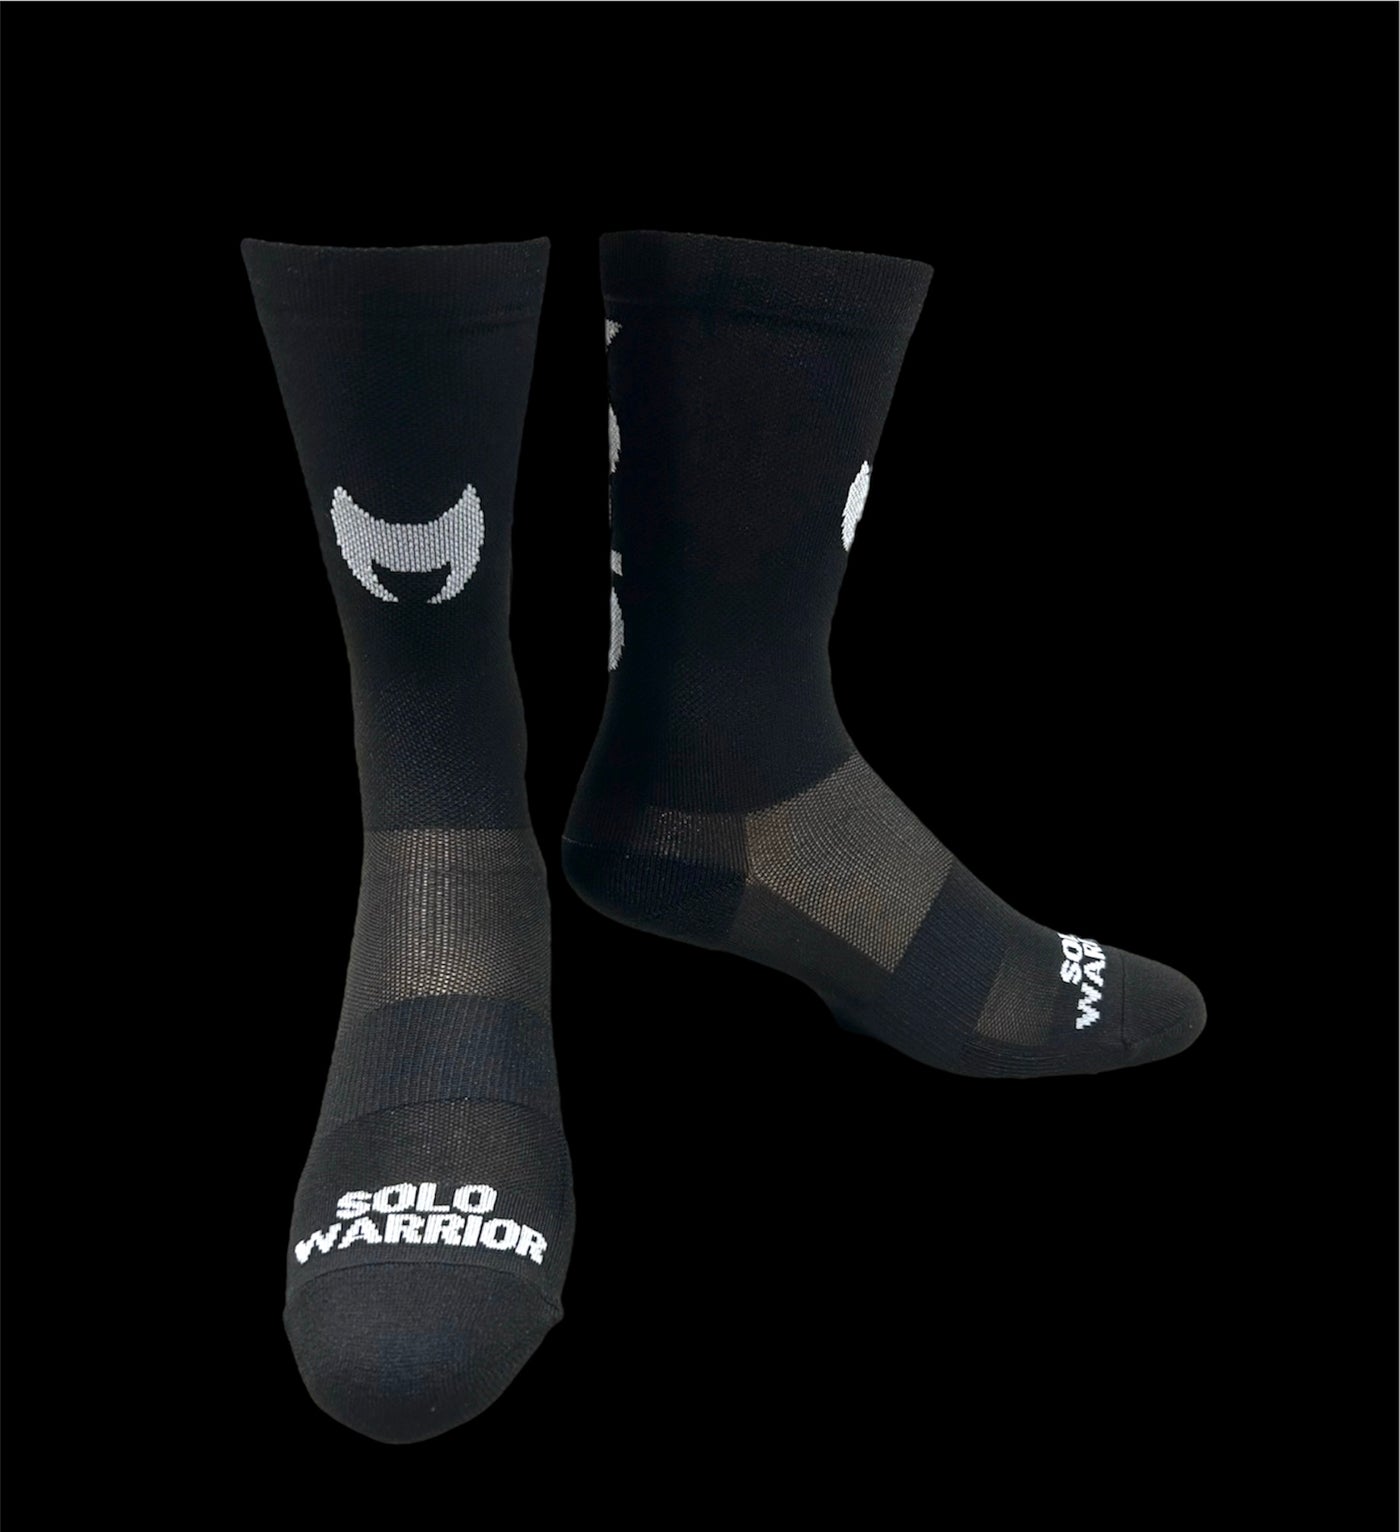 “YOLO” You Only Live Once, 6” black and white, men’s and women’s cycling sock with compression.